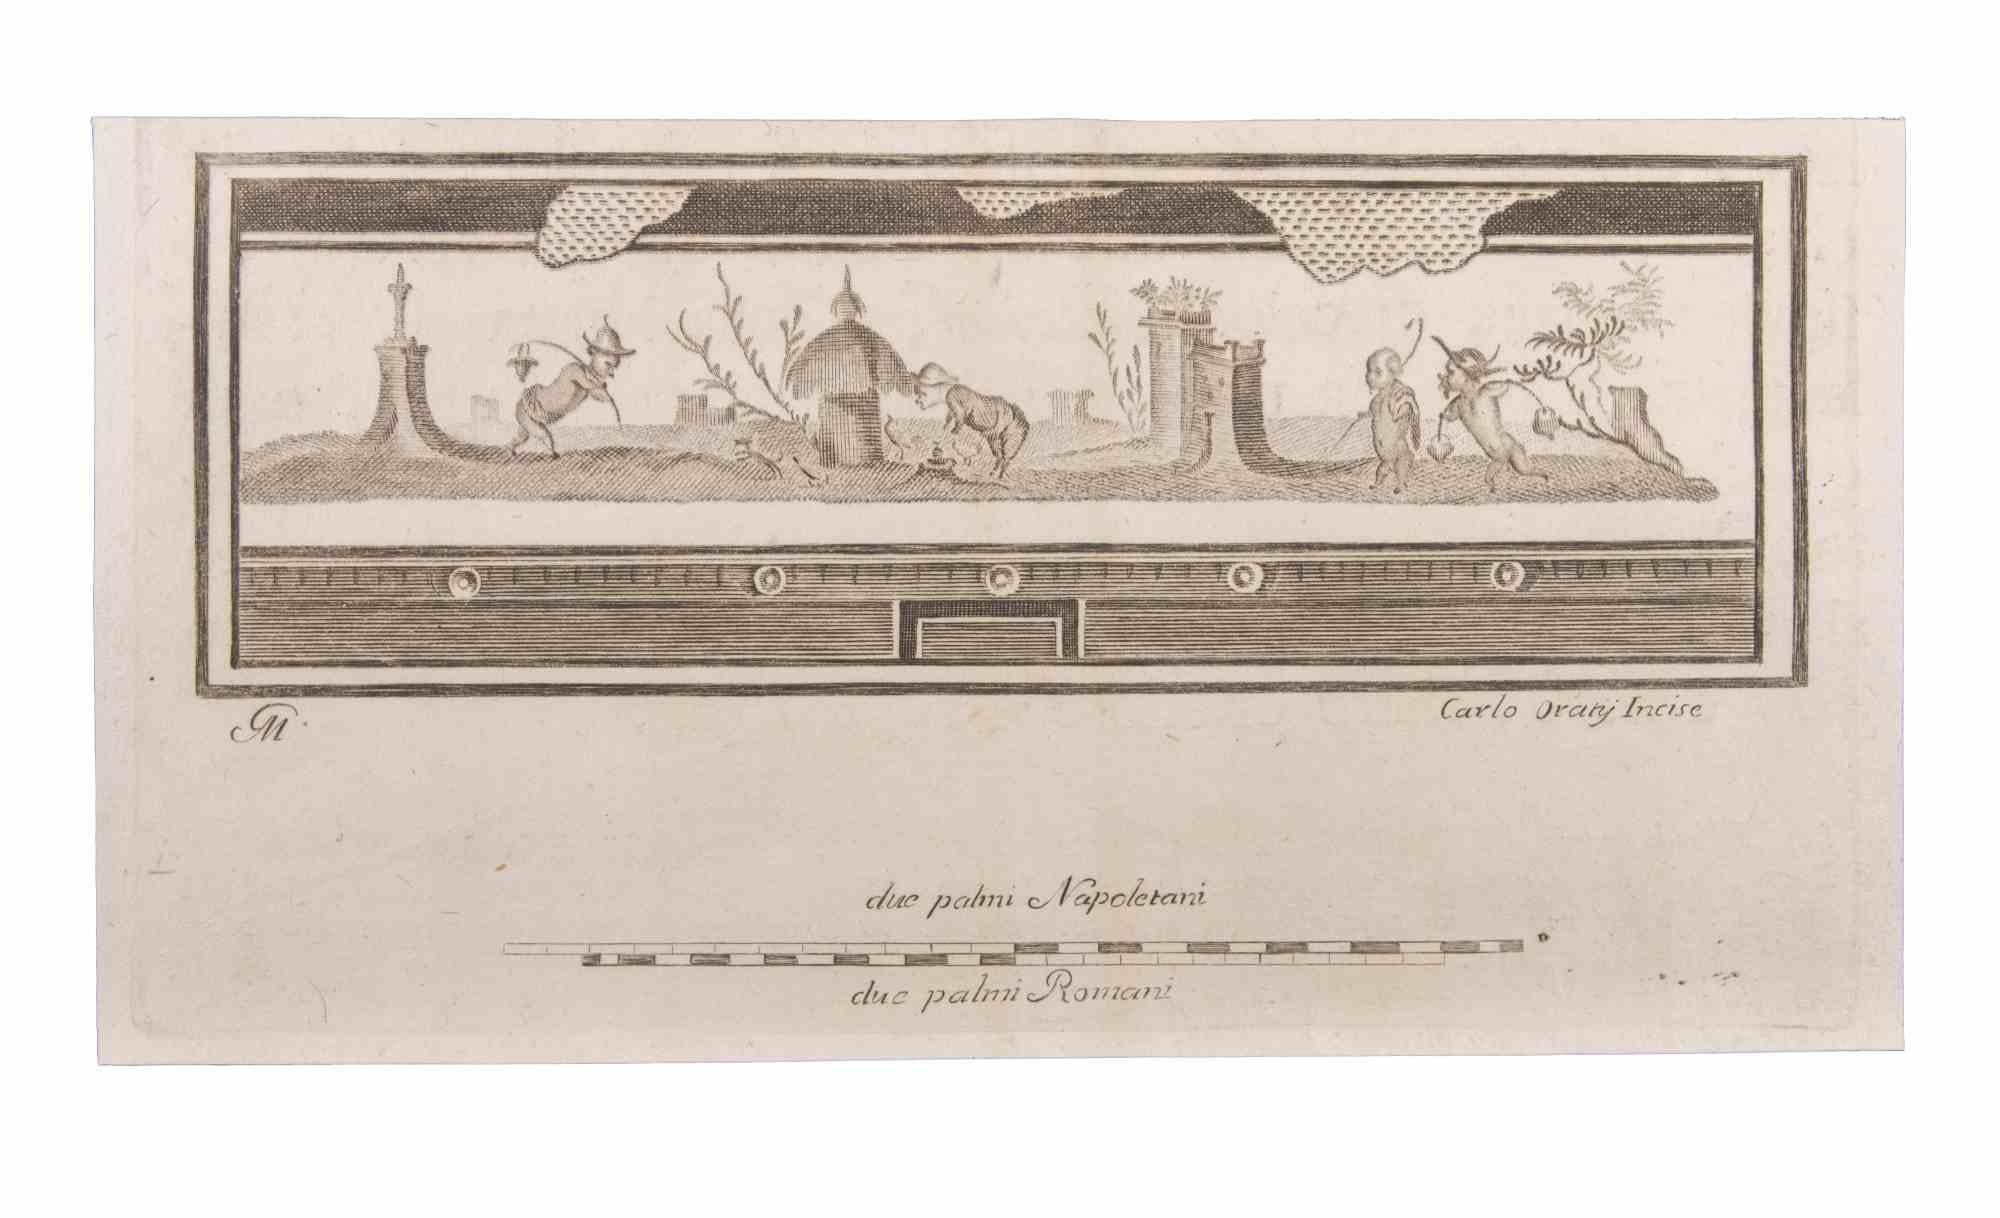 Landscape With Figures and Animals is an Etching realized by  Carlo Oraty (18th century).

The etching belongs to the print suite “Antiquities of Herculaneum Exposed” (original title: “Le Antichità di Ercolano Esposte”), an eight-volume volume of